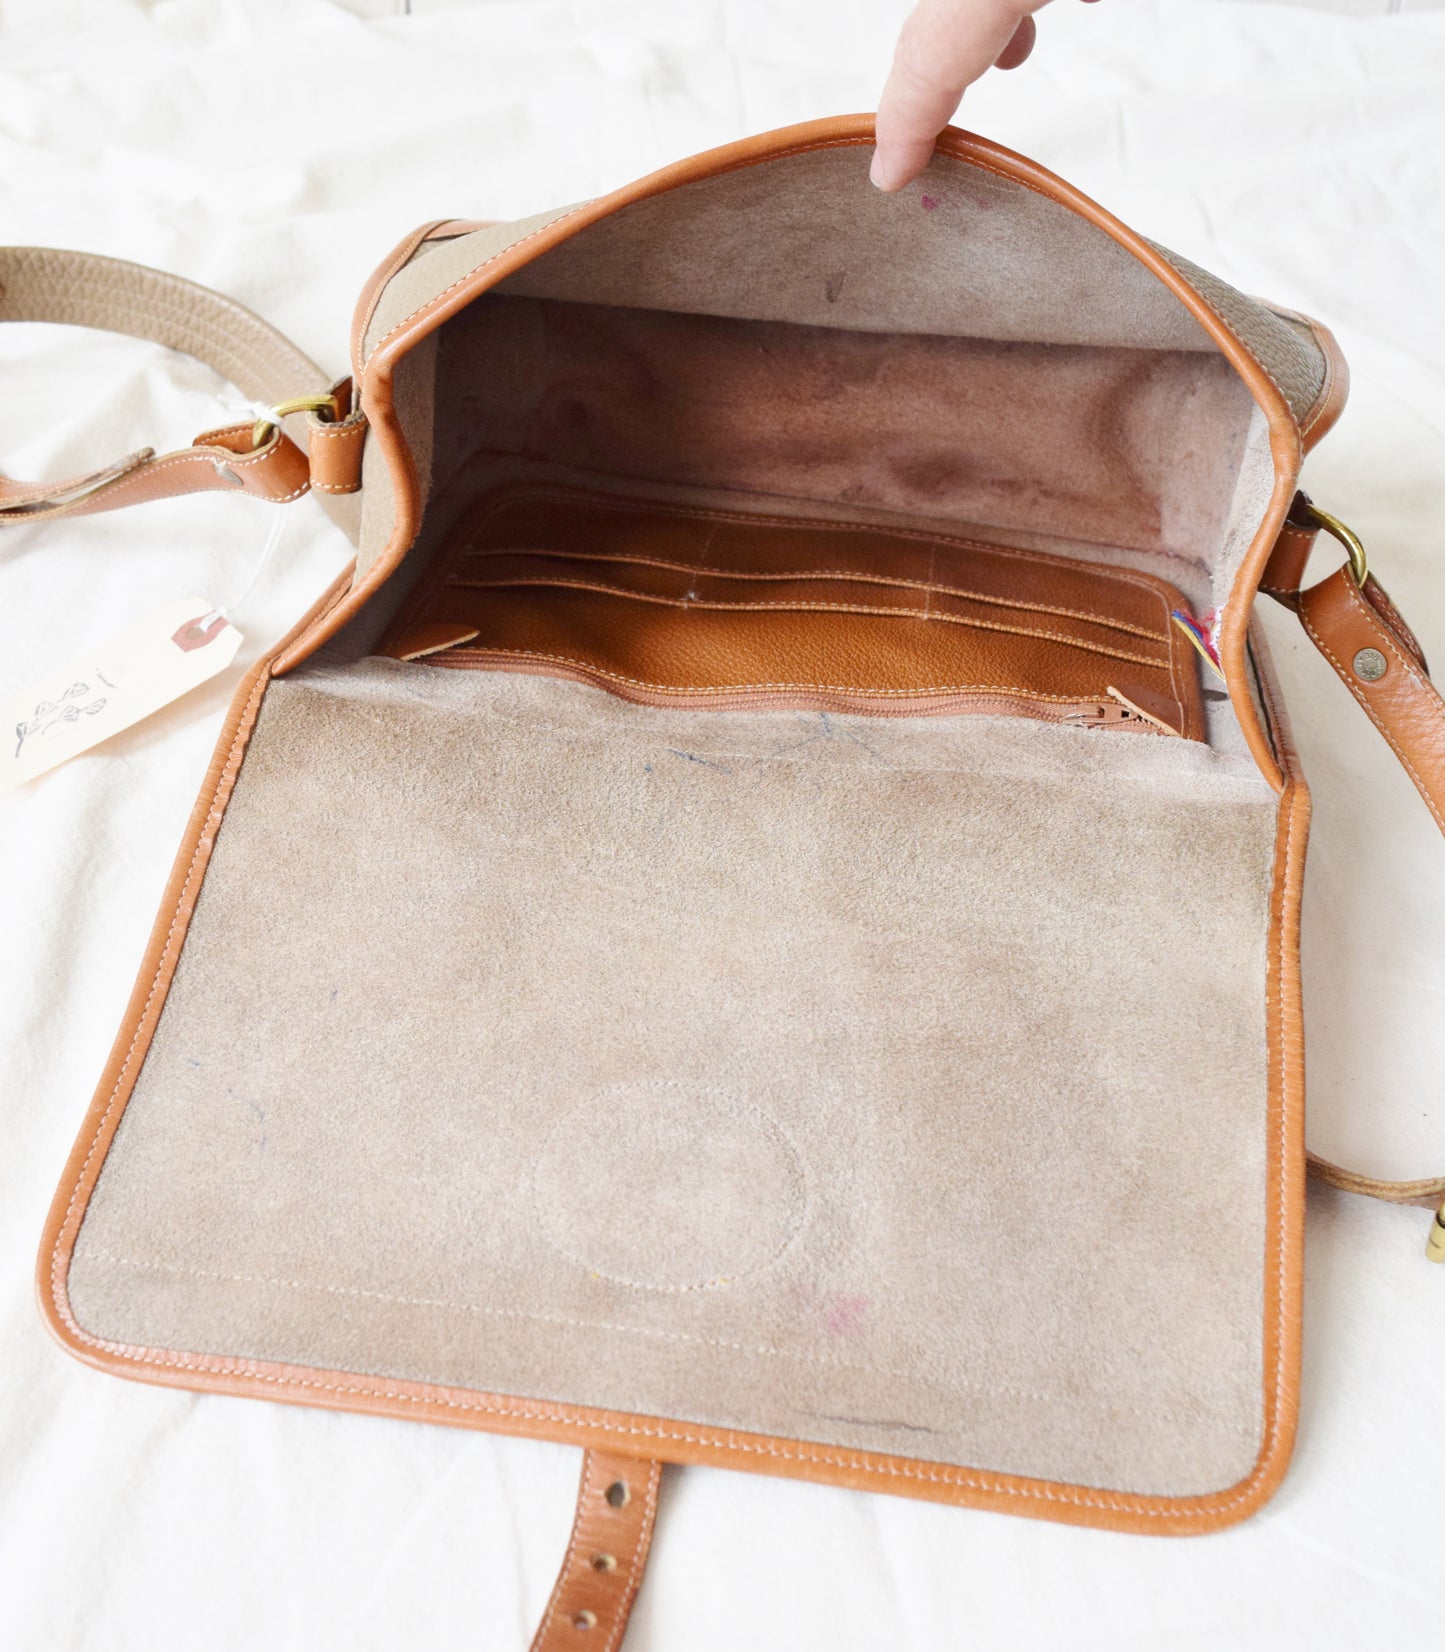 Vintage Dooney & Bourke All Weather Leather Crossbody Bag / Purse in Putty and British Tan